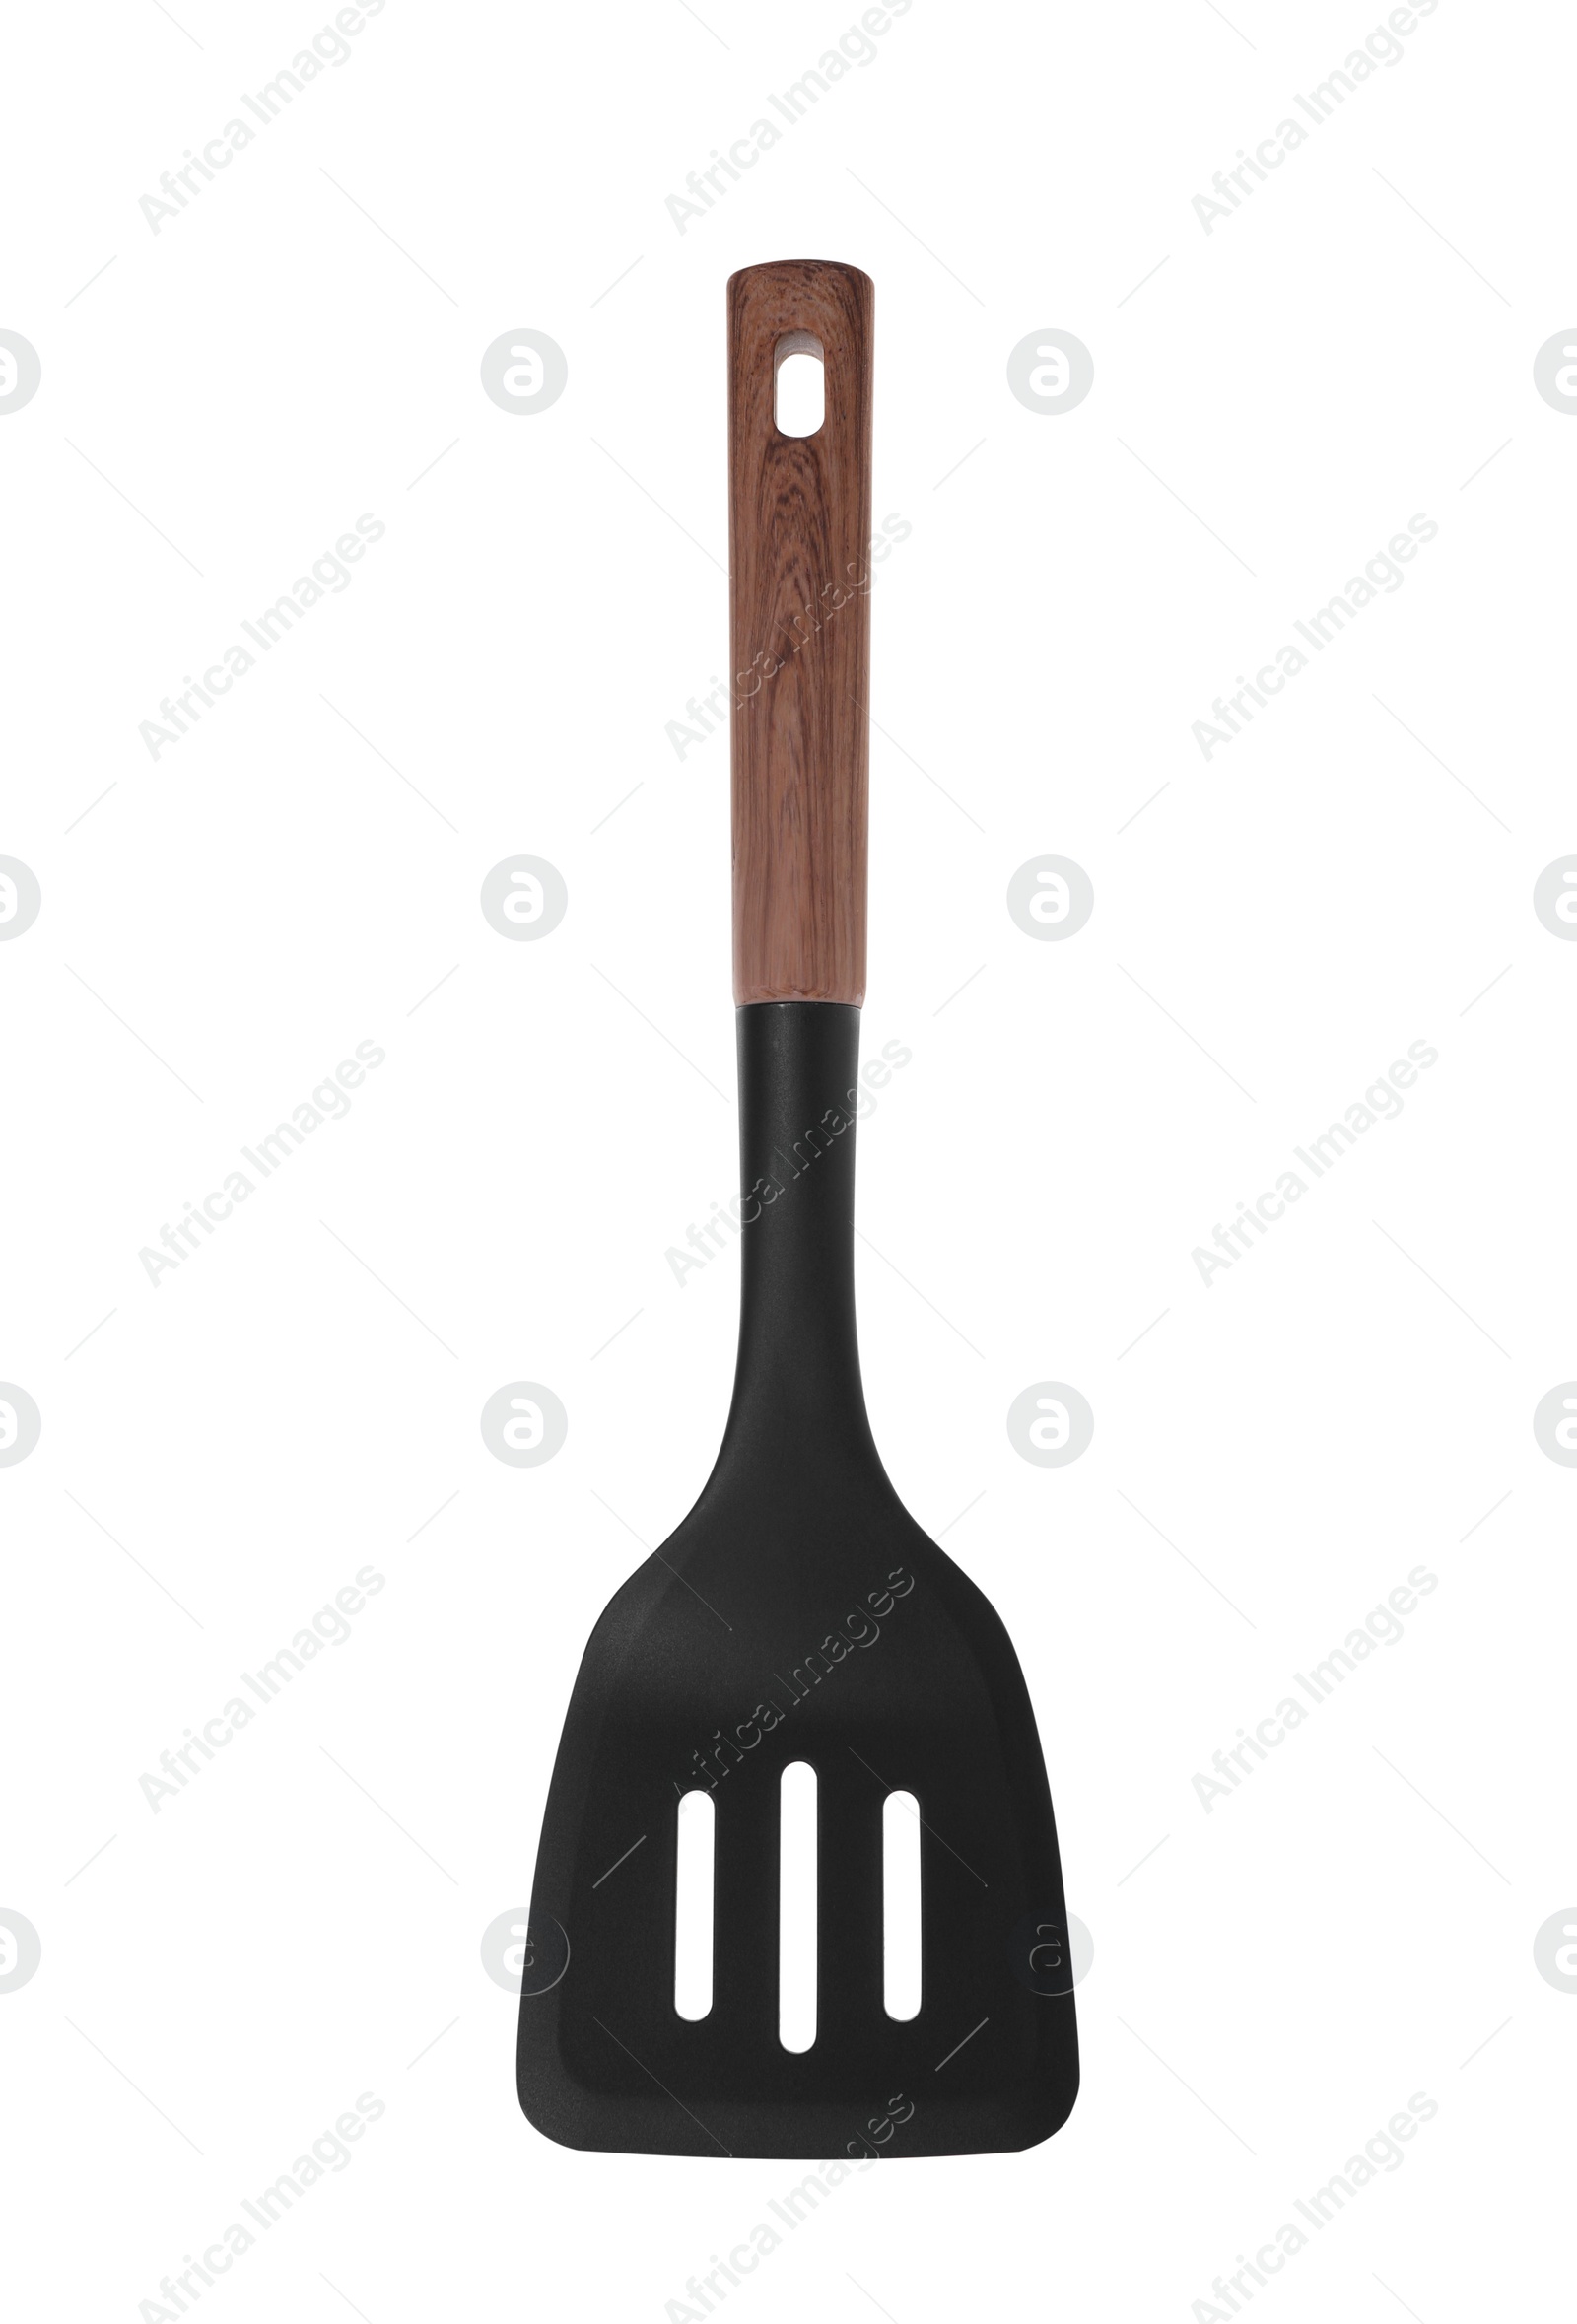 Photo of Slotted turner with wooden handle isolated on white. Kitchen utensil